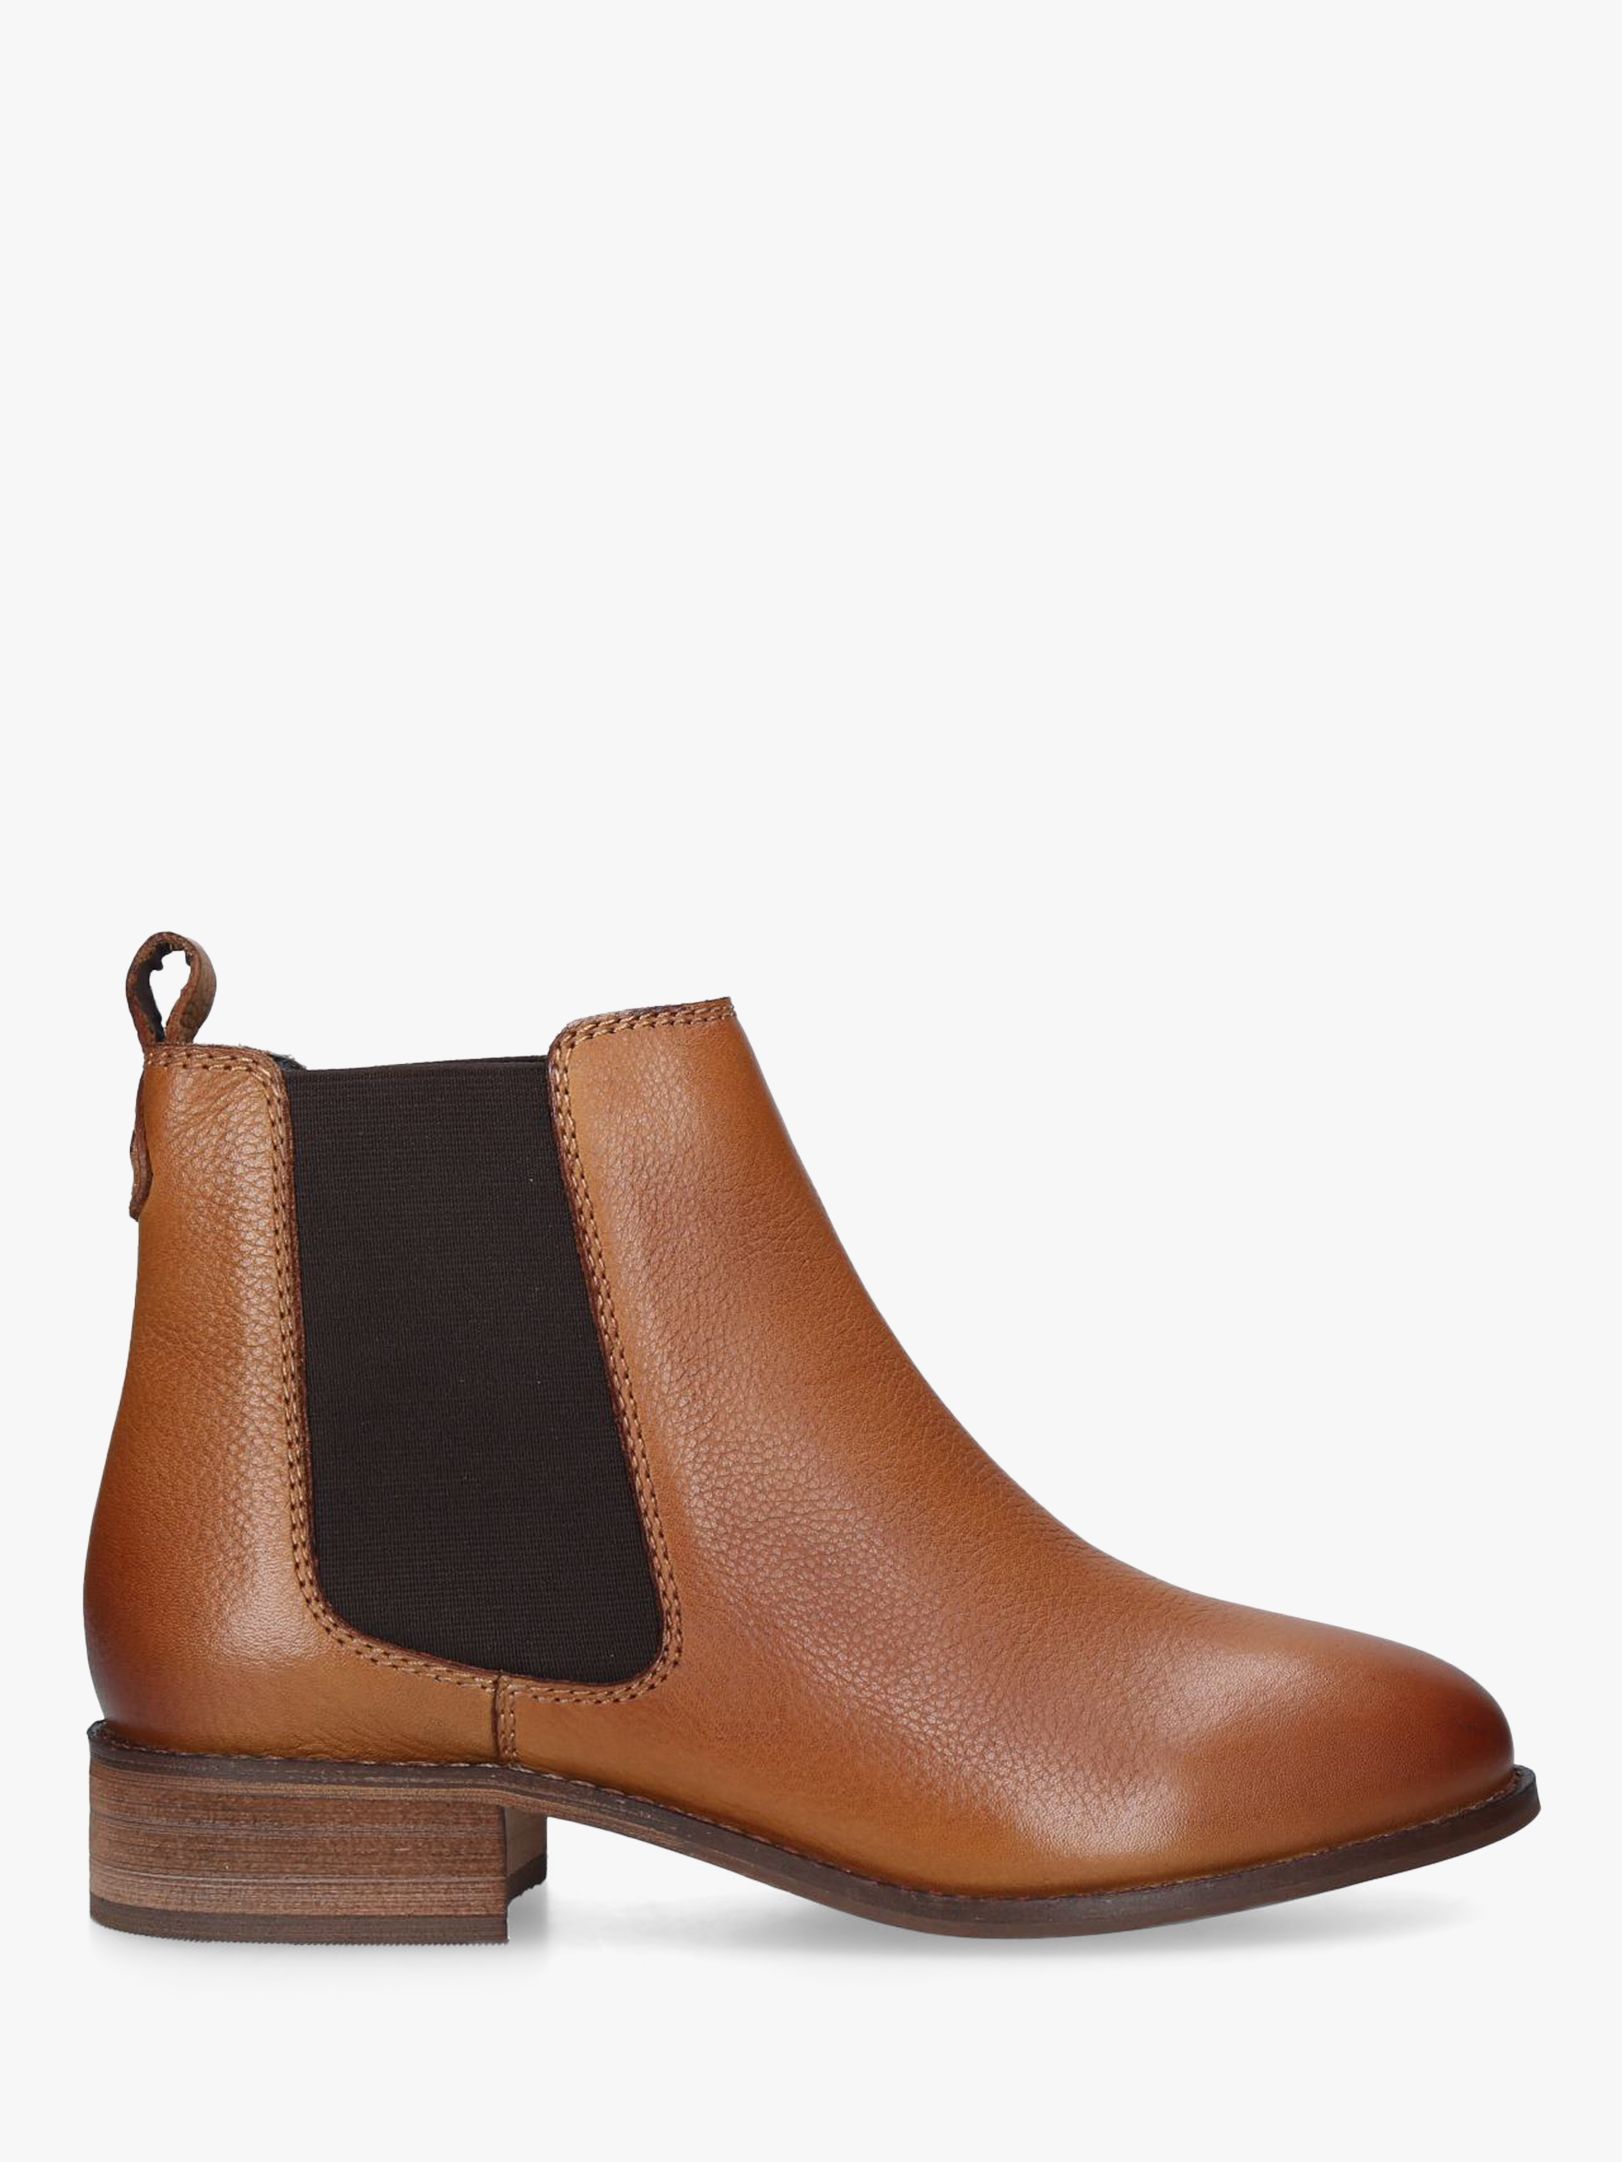 Carvela Stormy Leather Chelsea Boots, Tan at John Lewis & Partners